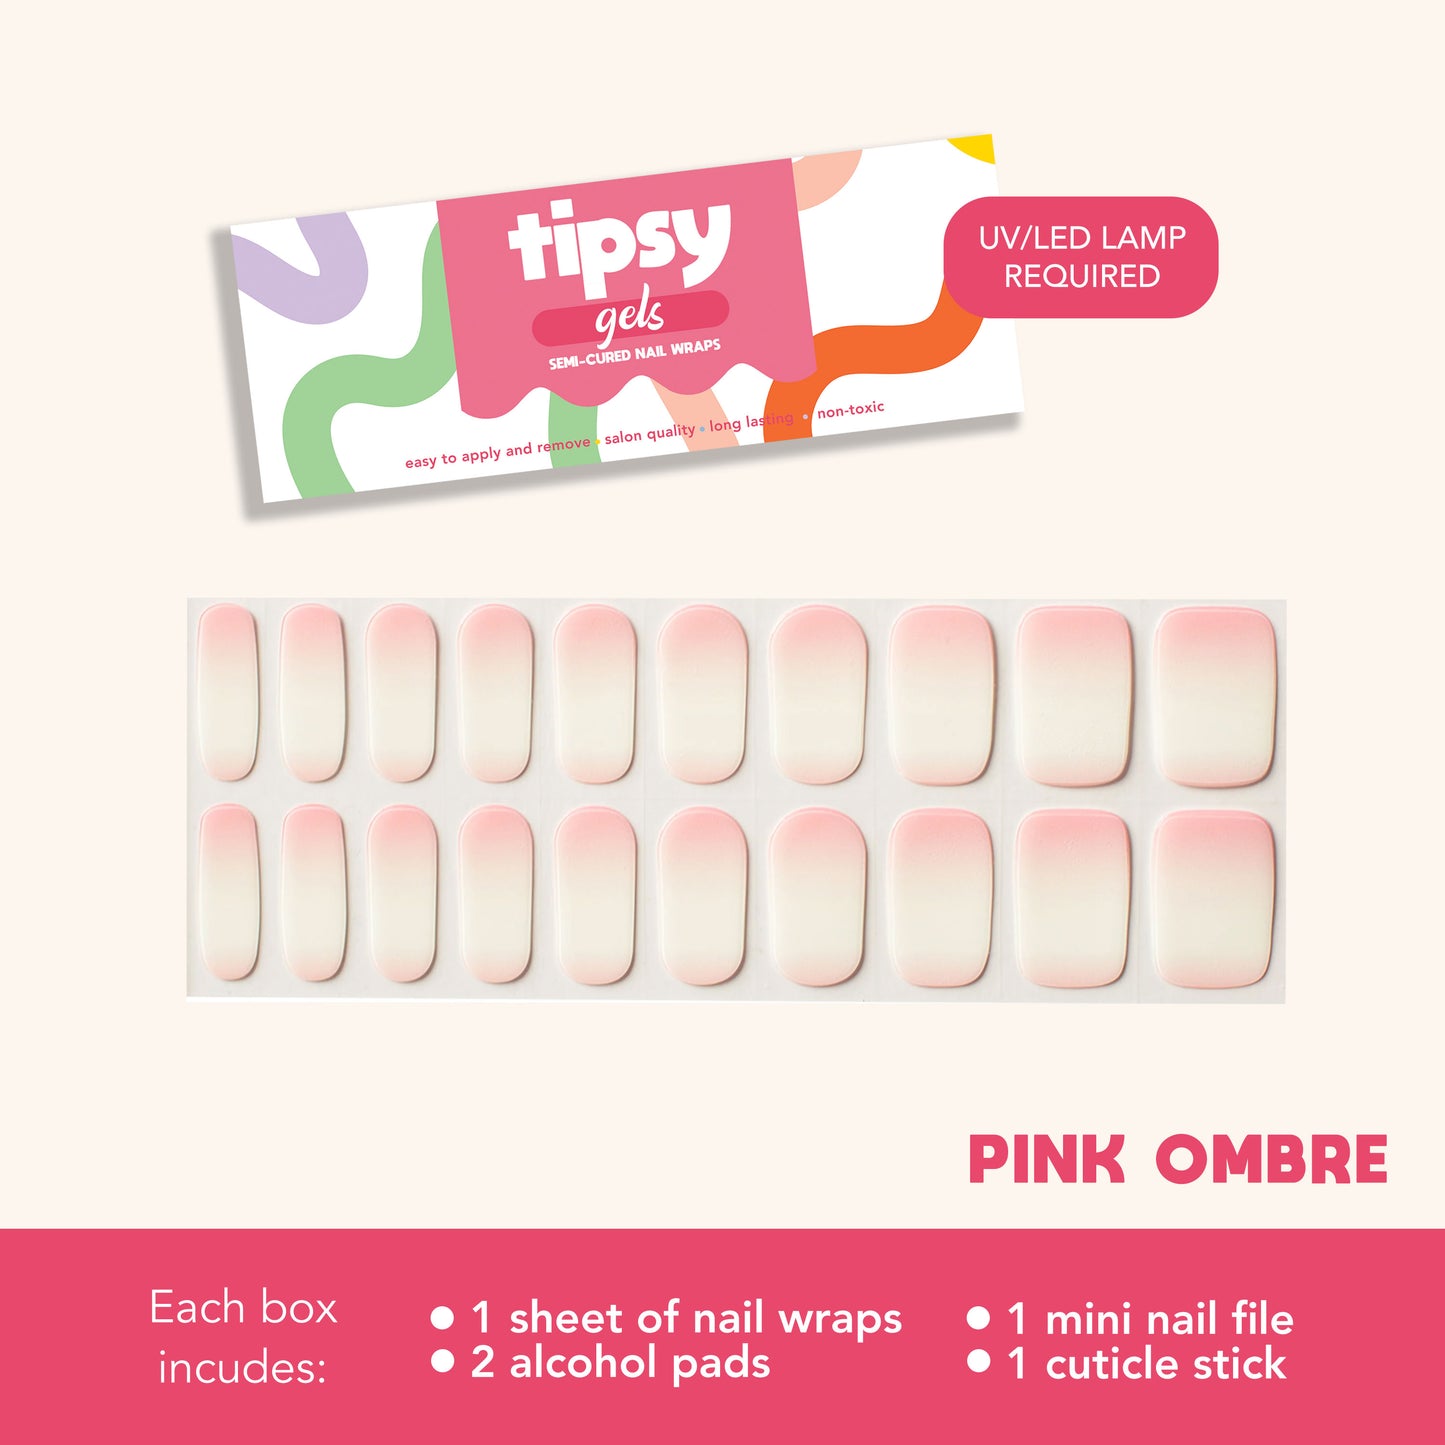 Pink Ombre (Tipsy Gels Semi-Cured Nail Wraps)